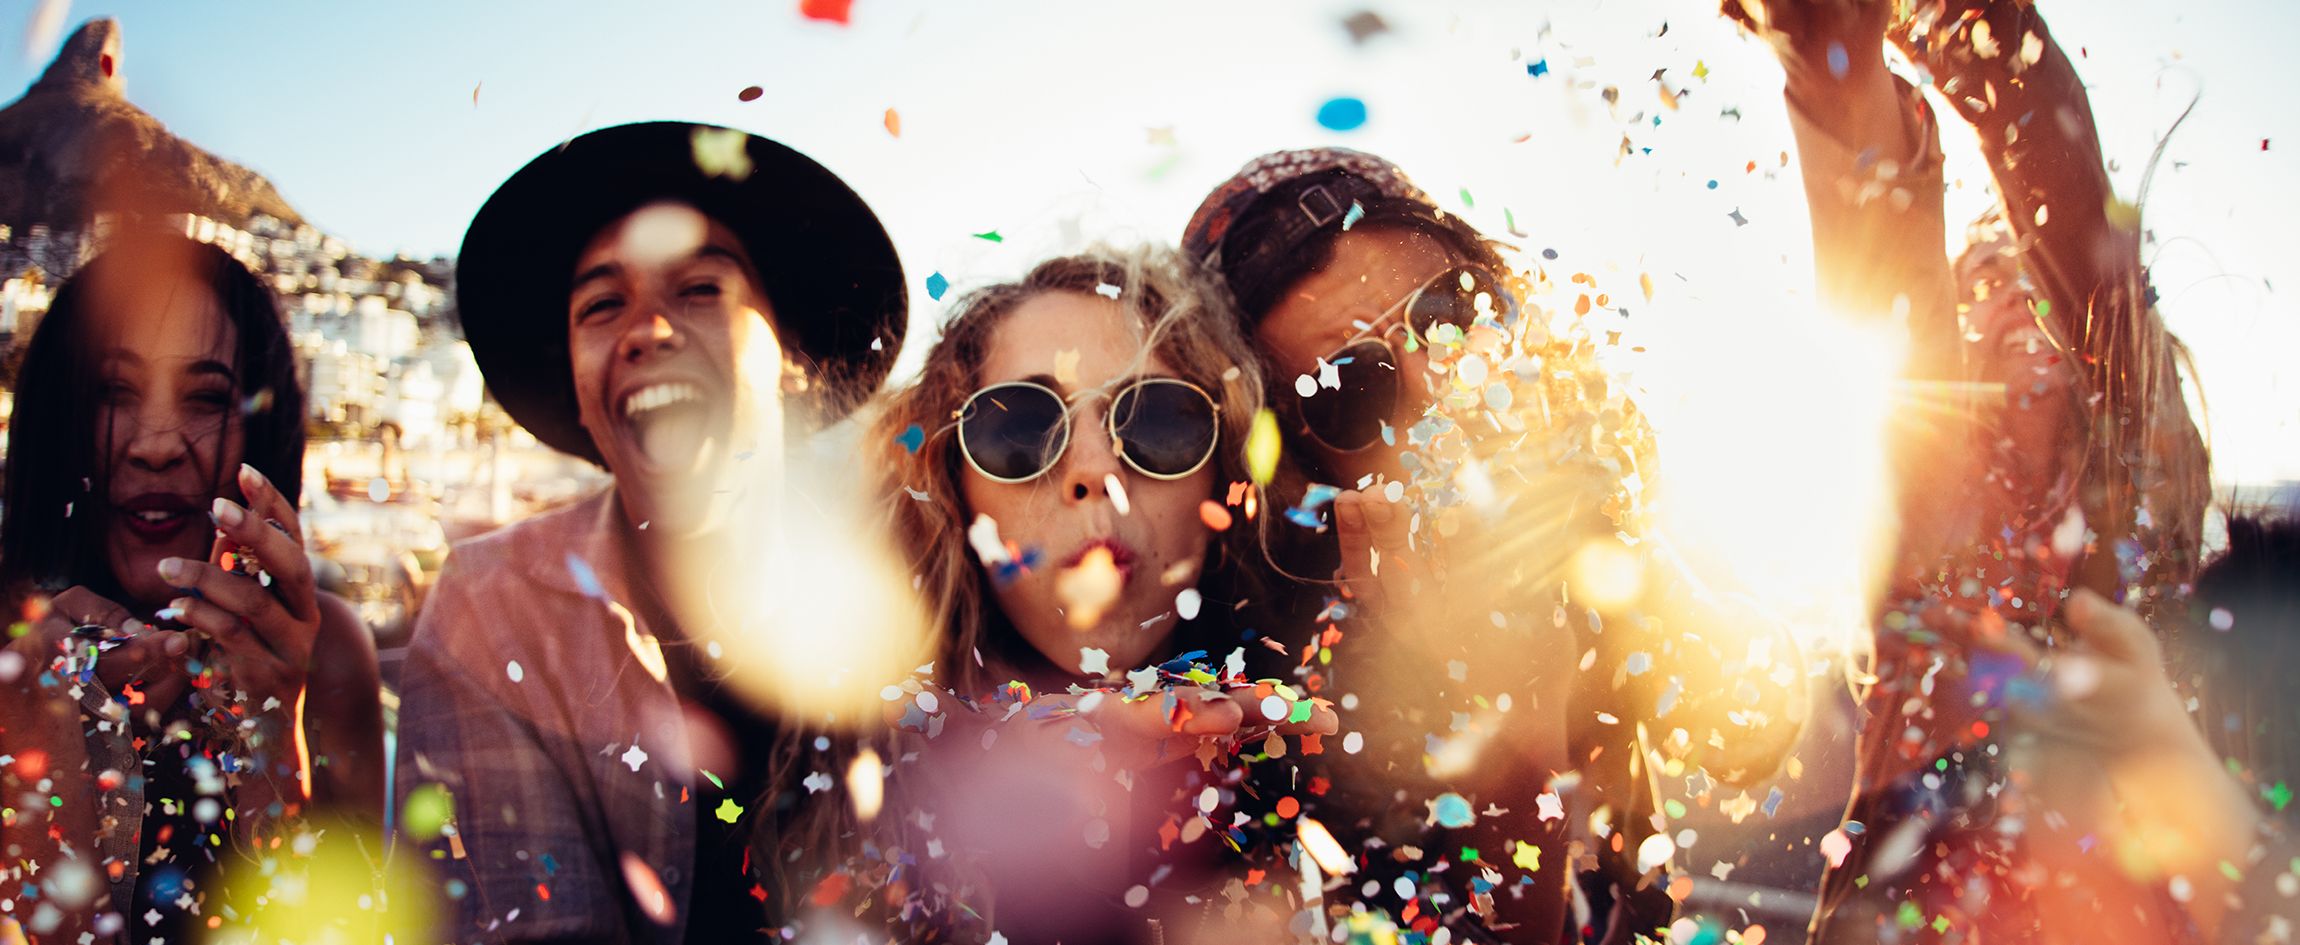 A group of friends celebrating outdoors with confetti